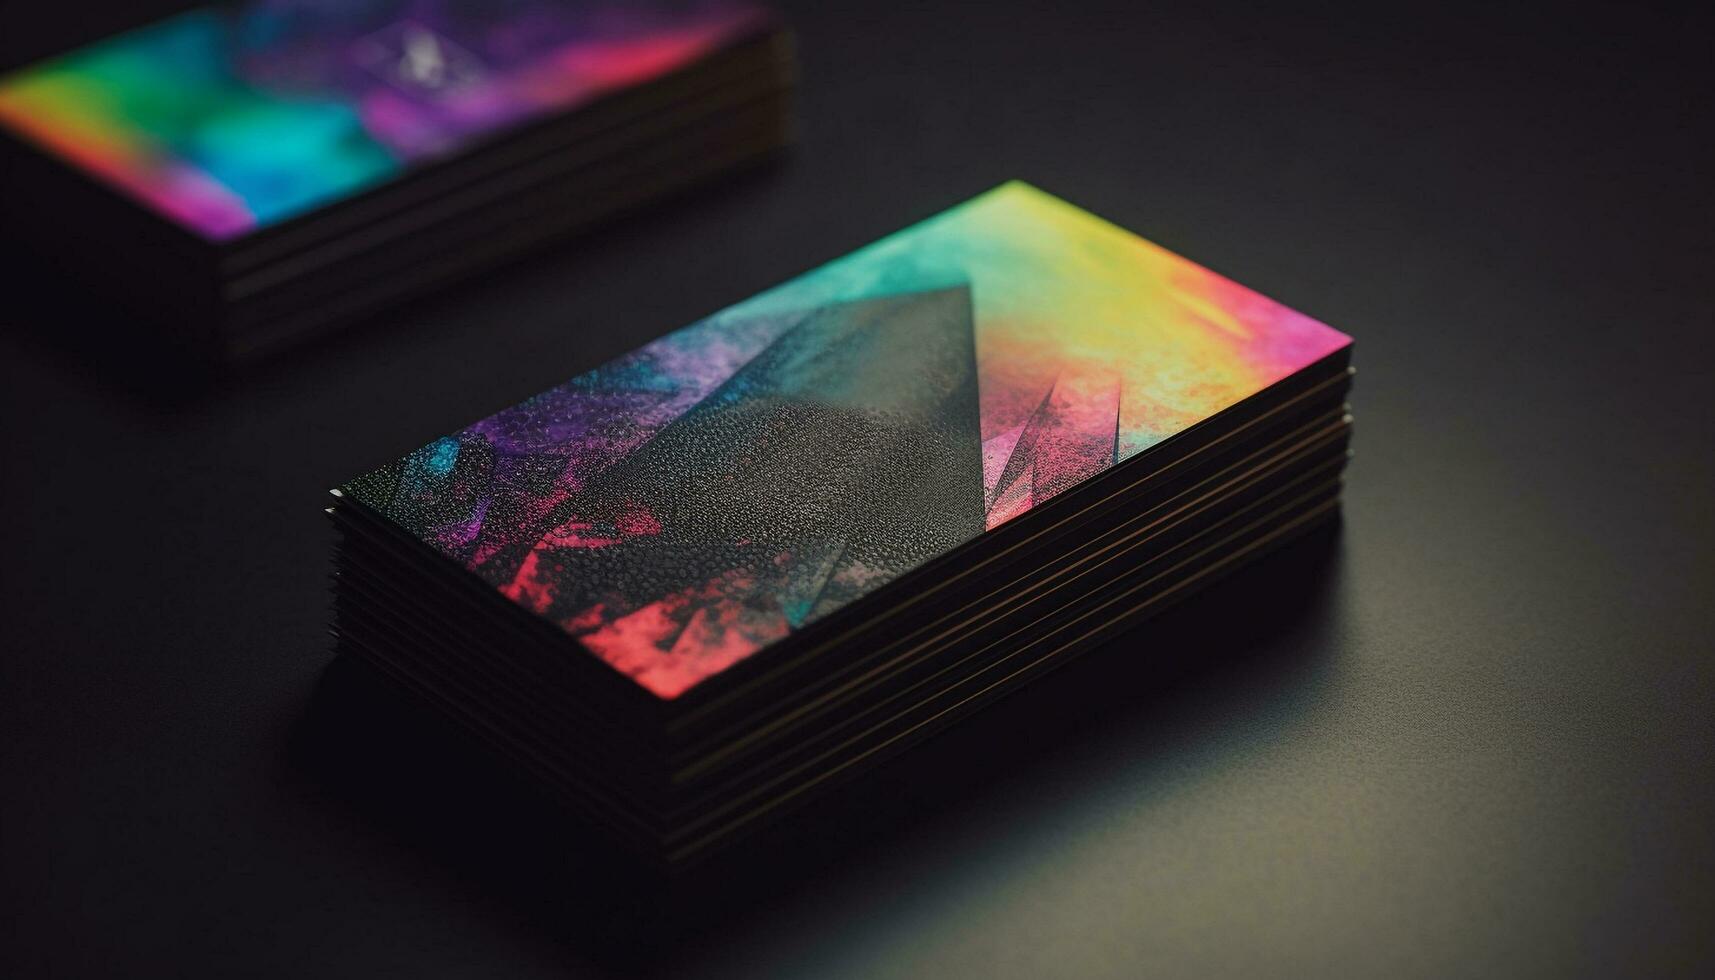 Vibrant colored book covers illuminate the dark table with wisdom generated by AI photo